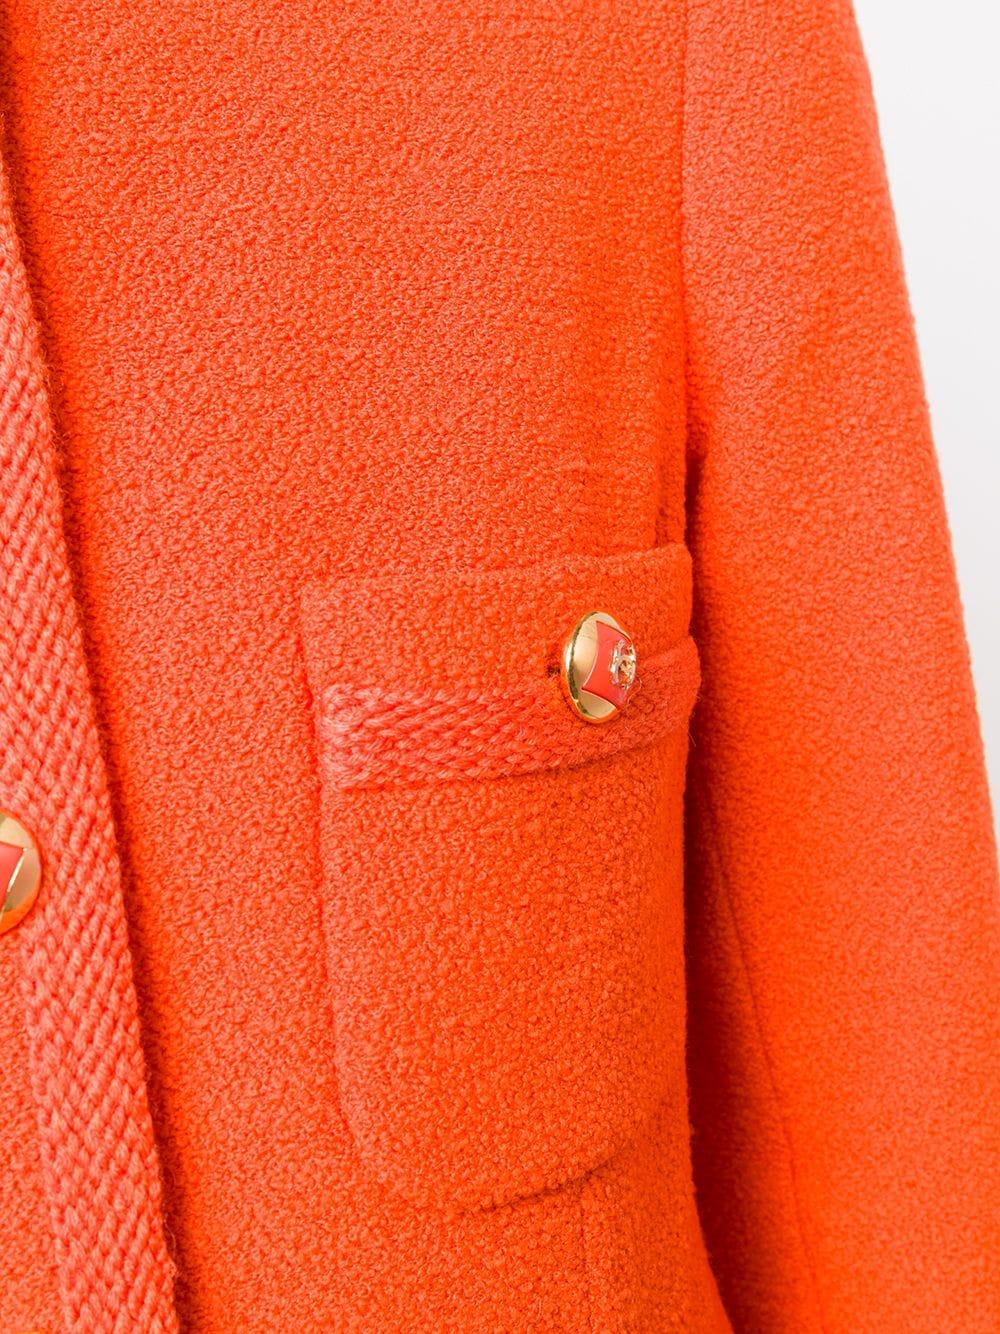 Expertly cut and crafted in France from pure wool in a vibrant shade of tangerine orange, this pre-owned, long-sleeved jacket from Chanel showcases the modern design of crew neck collar and a textured pattern throughout and a pure silk lining. The